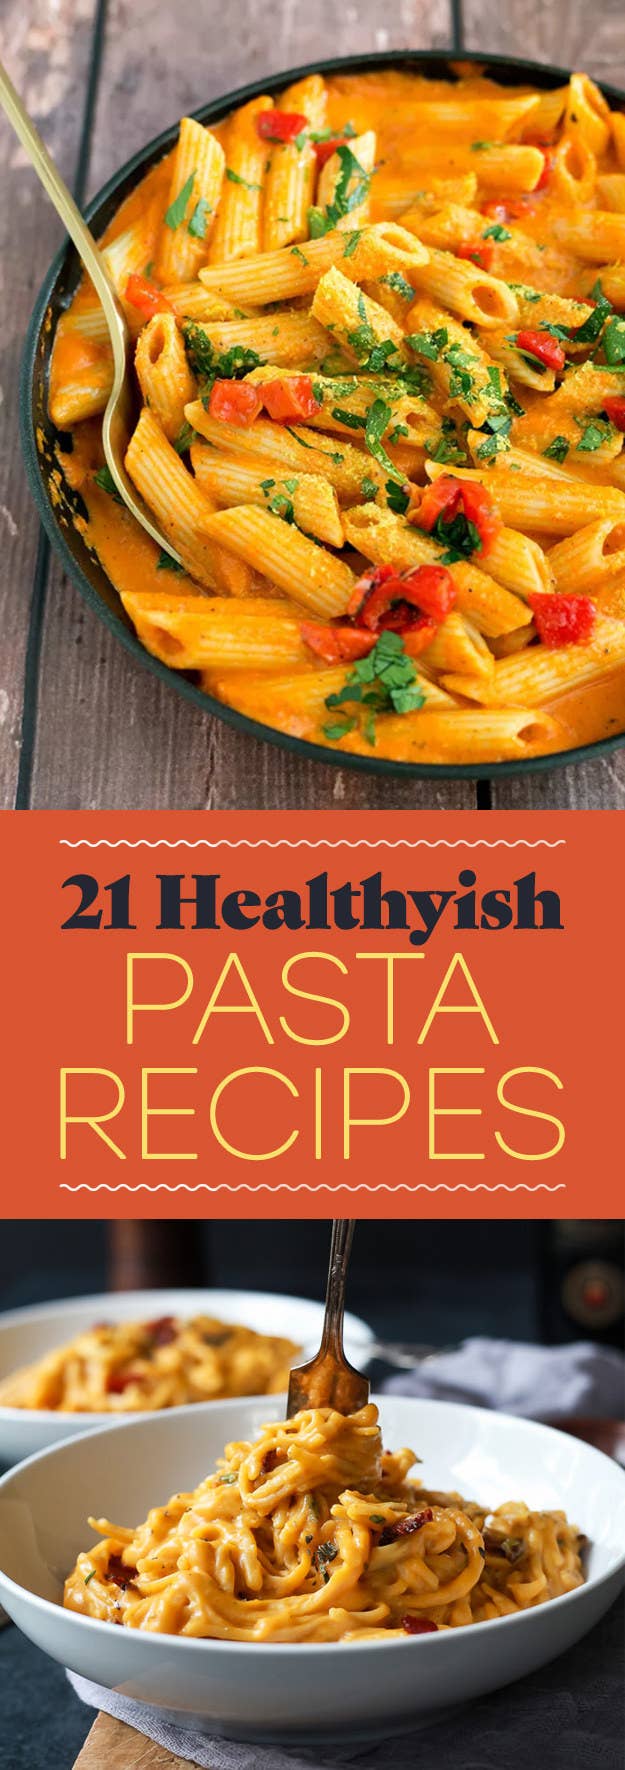 21 Healthyish Noodle Recipes That Will Satisfy Your Pasta Craving